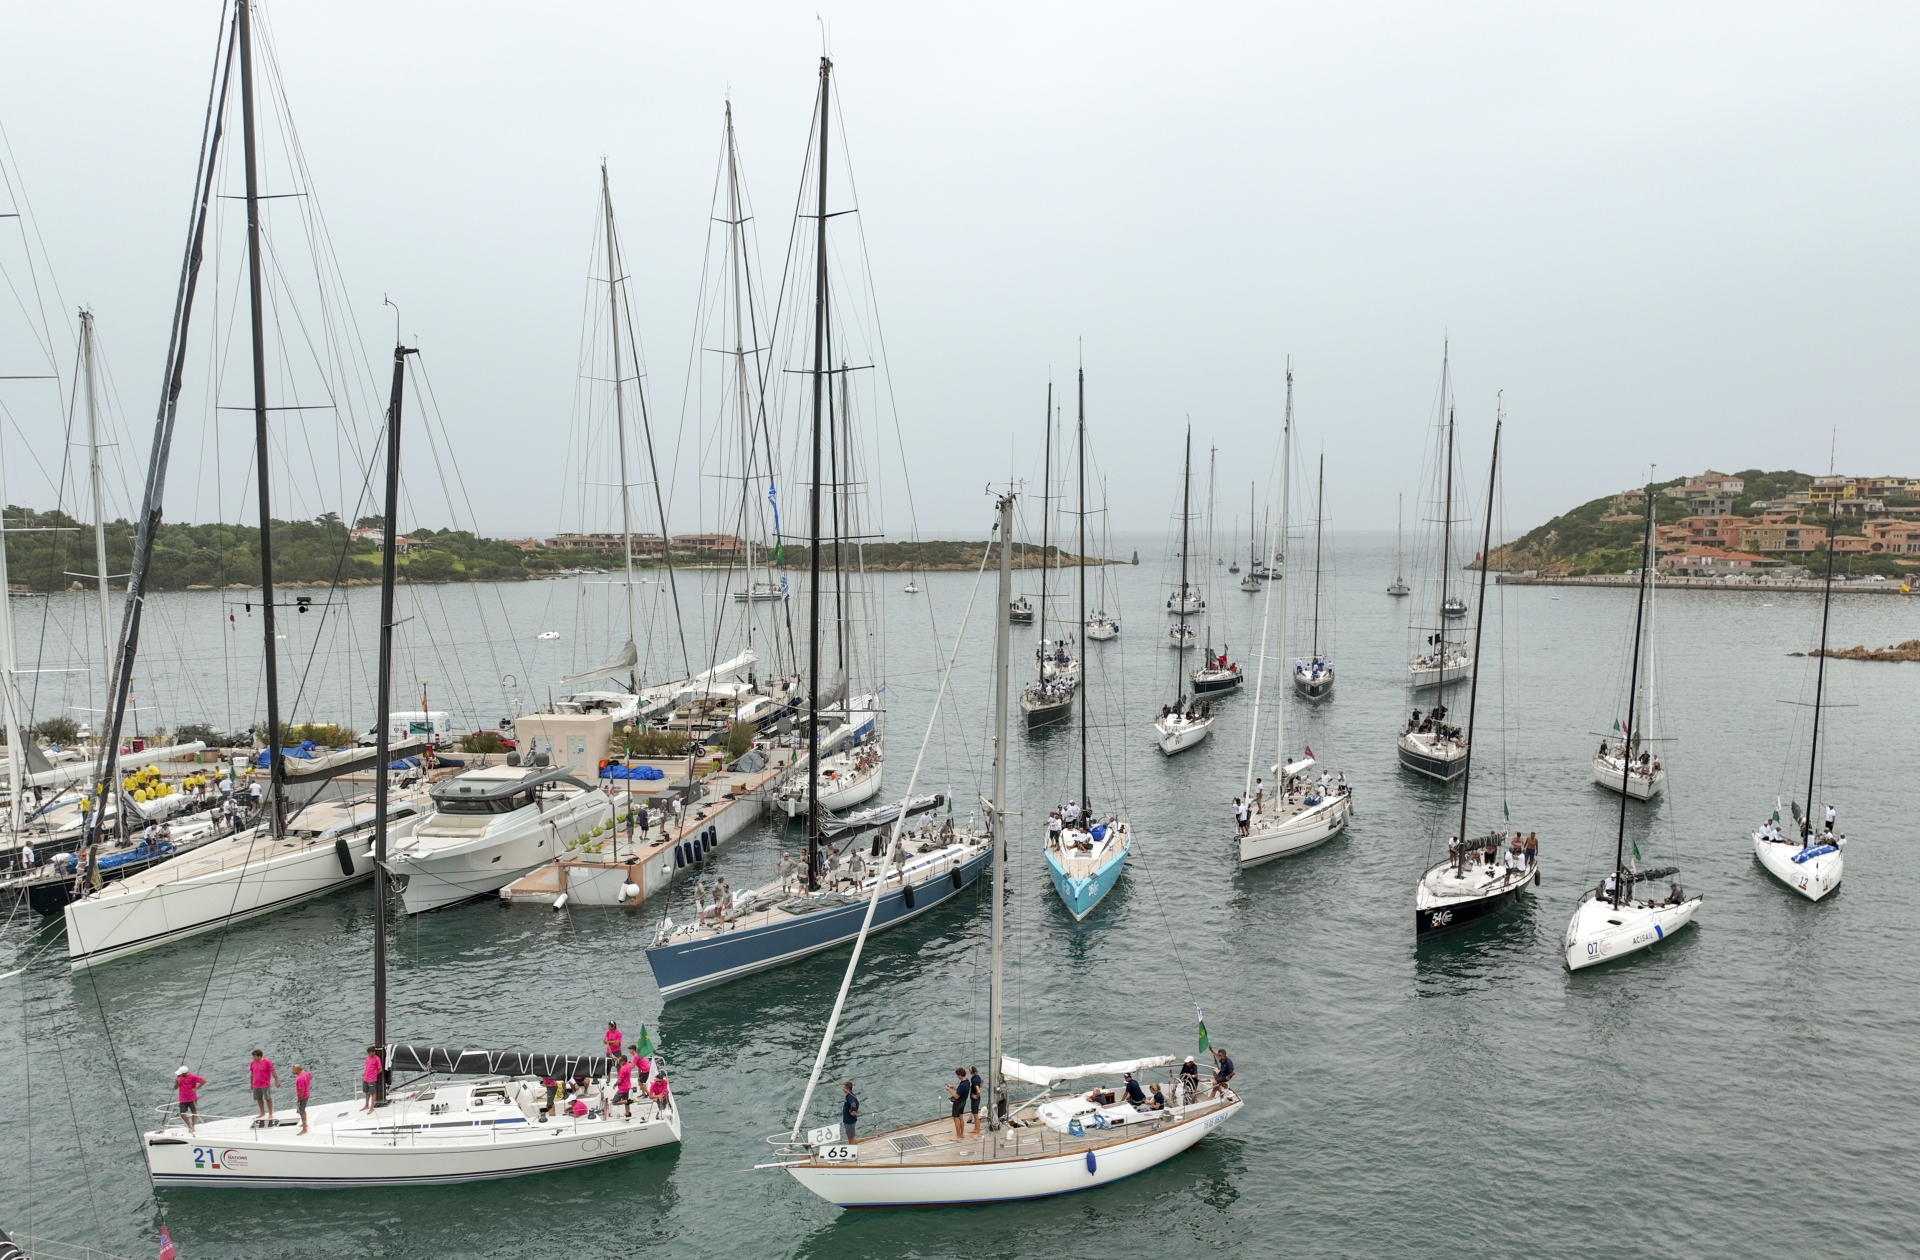 Racing cancelled for today at Rolex Swan Cup - Press Release - Yacht Club Costa Smeralda